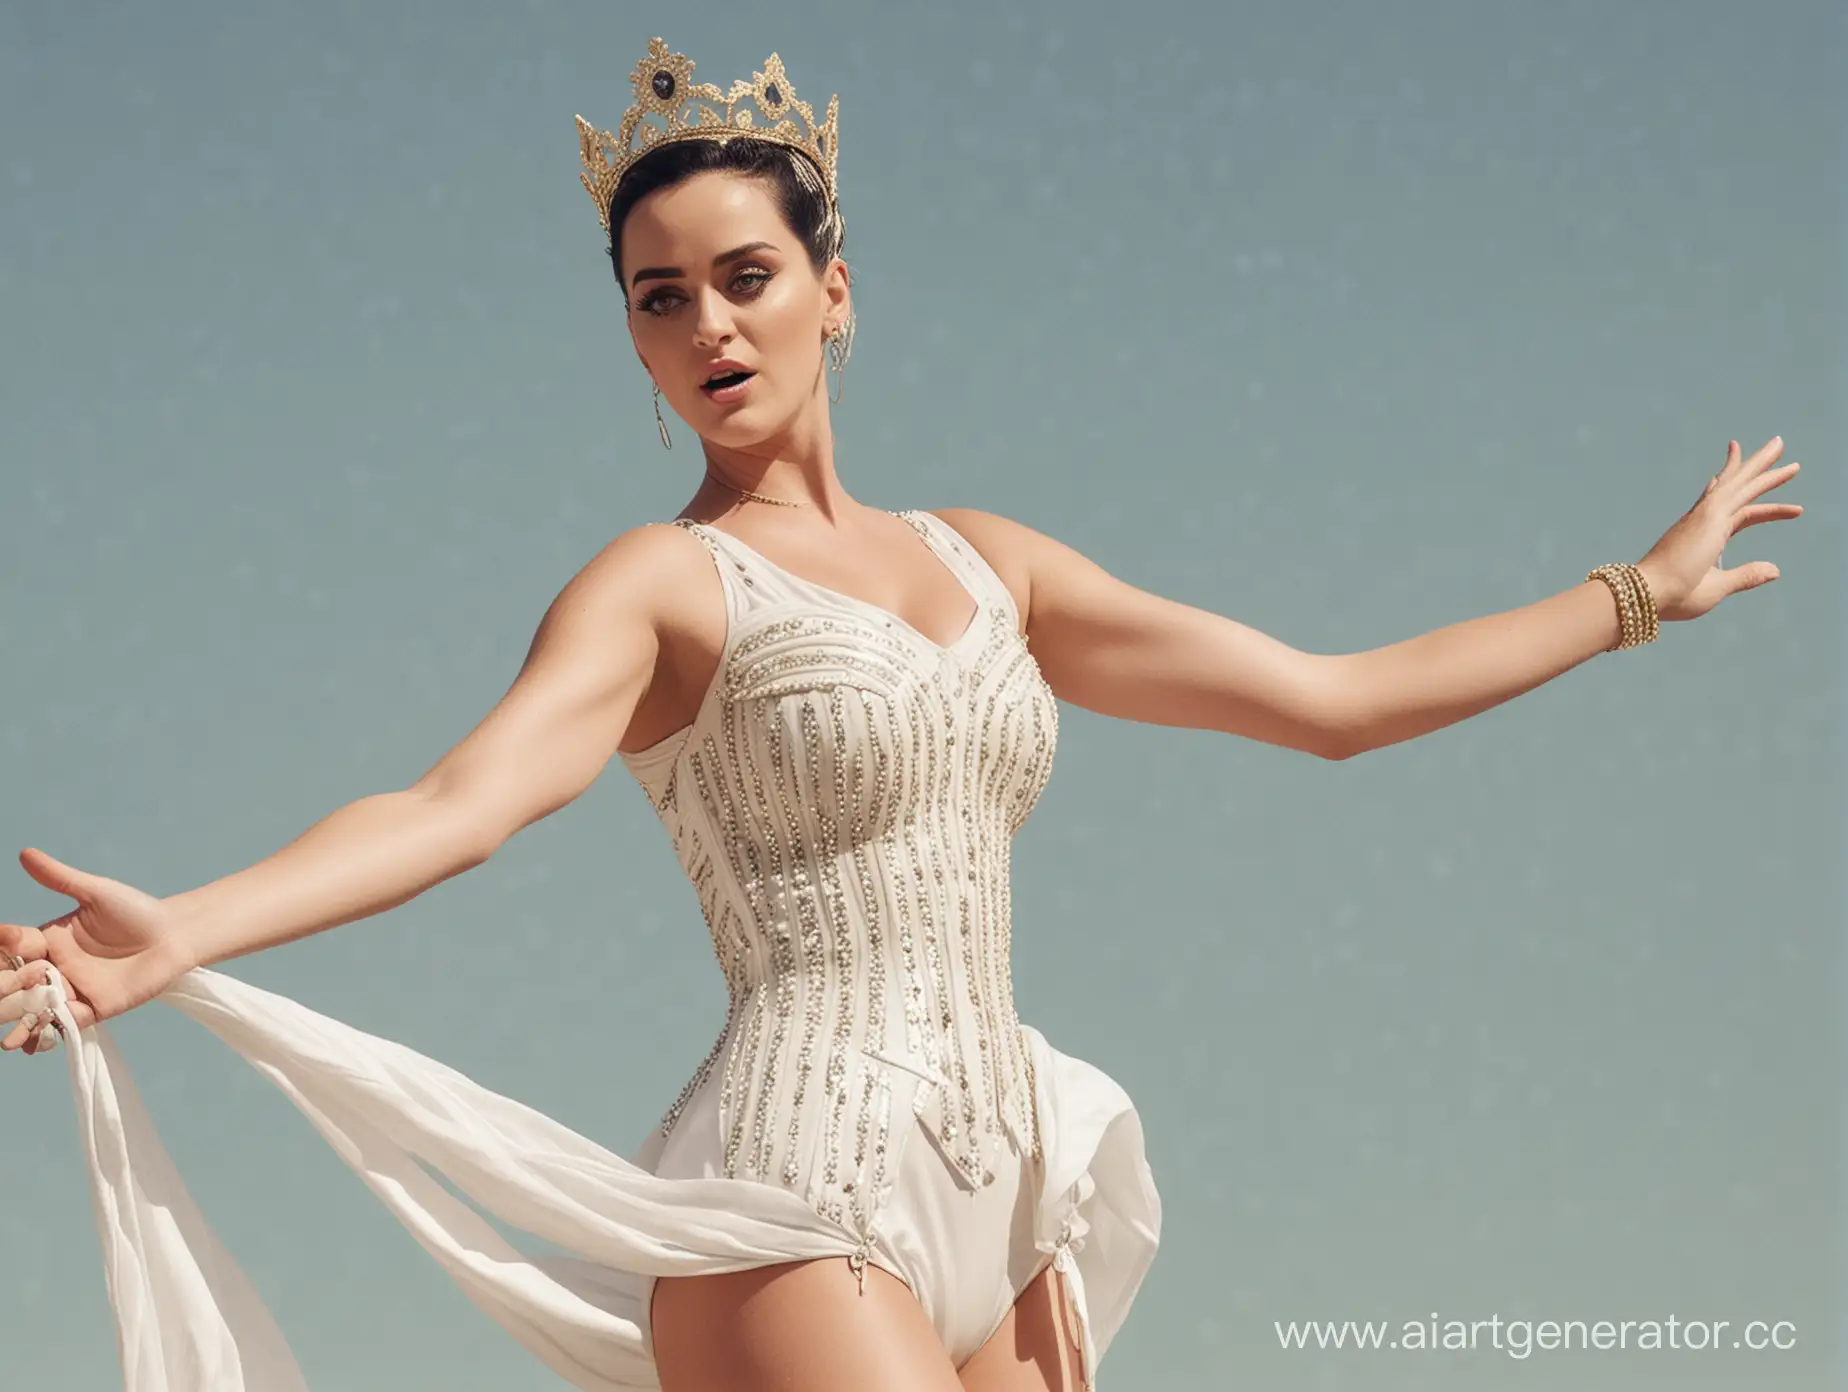 Katy-Perry-Enthralling-the-World-with-her-Royal-Charm